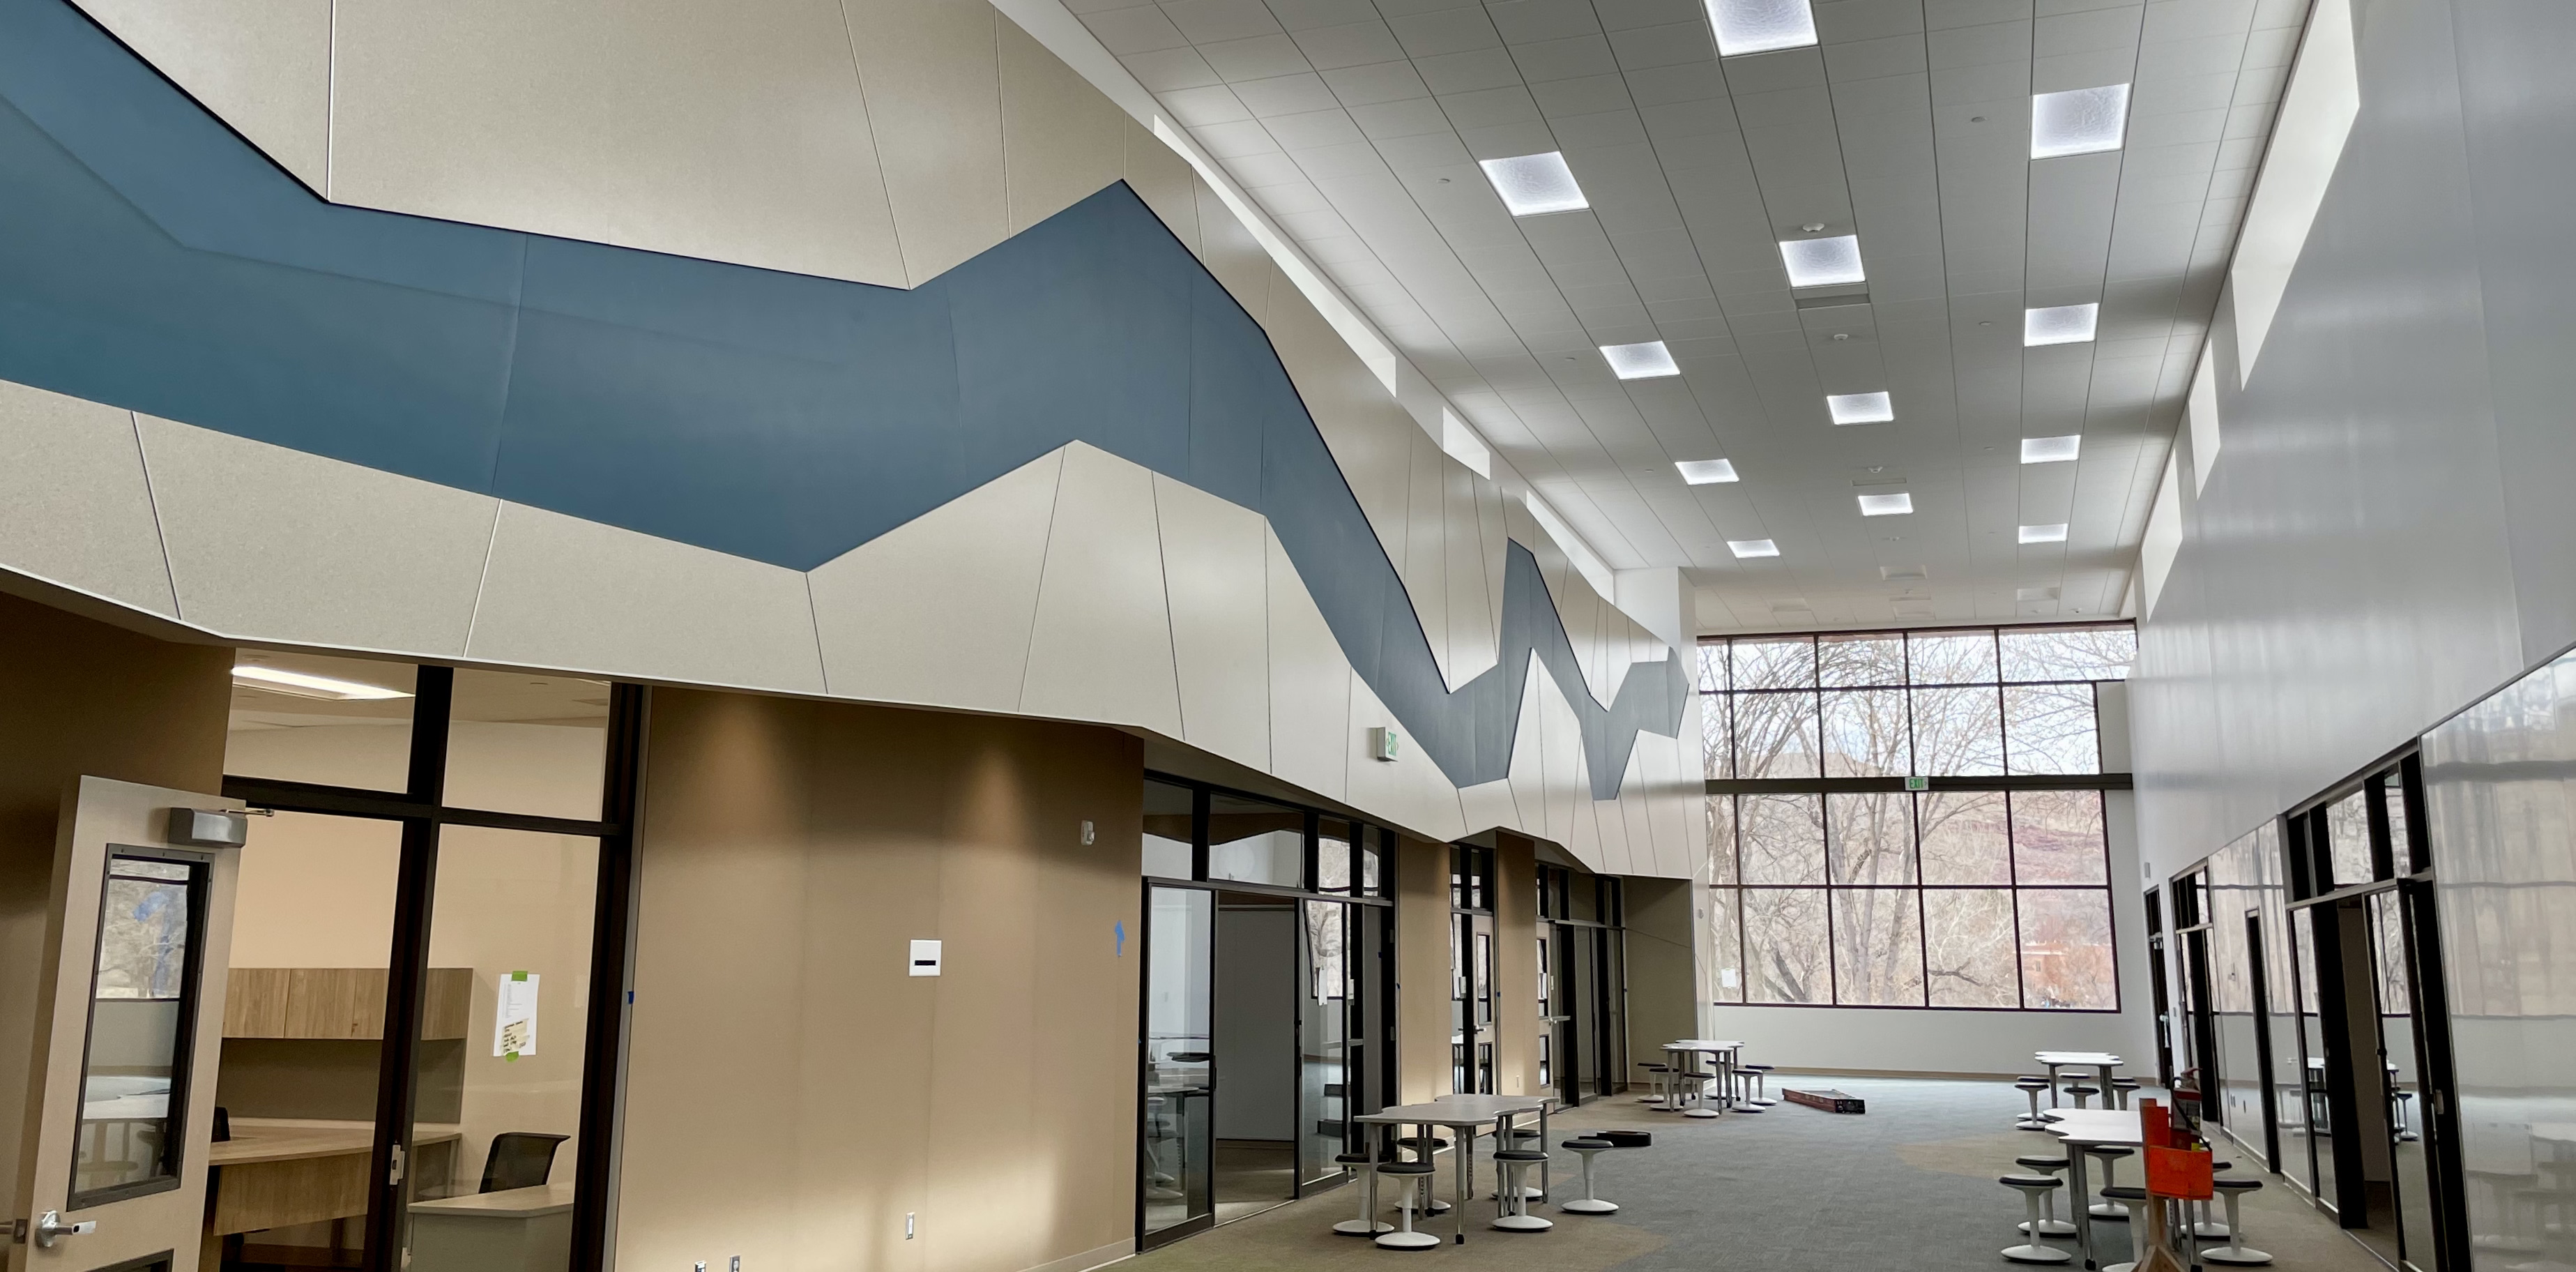 The eight grade wing of the new middle school is the tallest of the three classroom wings and features an element inspired by the Colorado River above the classrooms. 